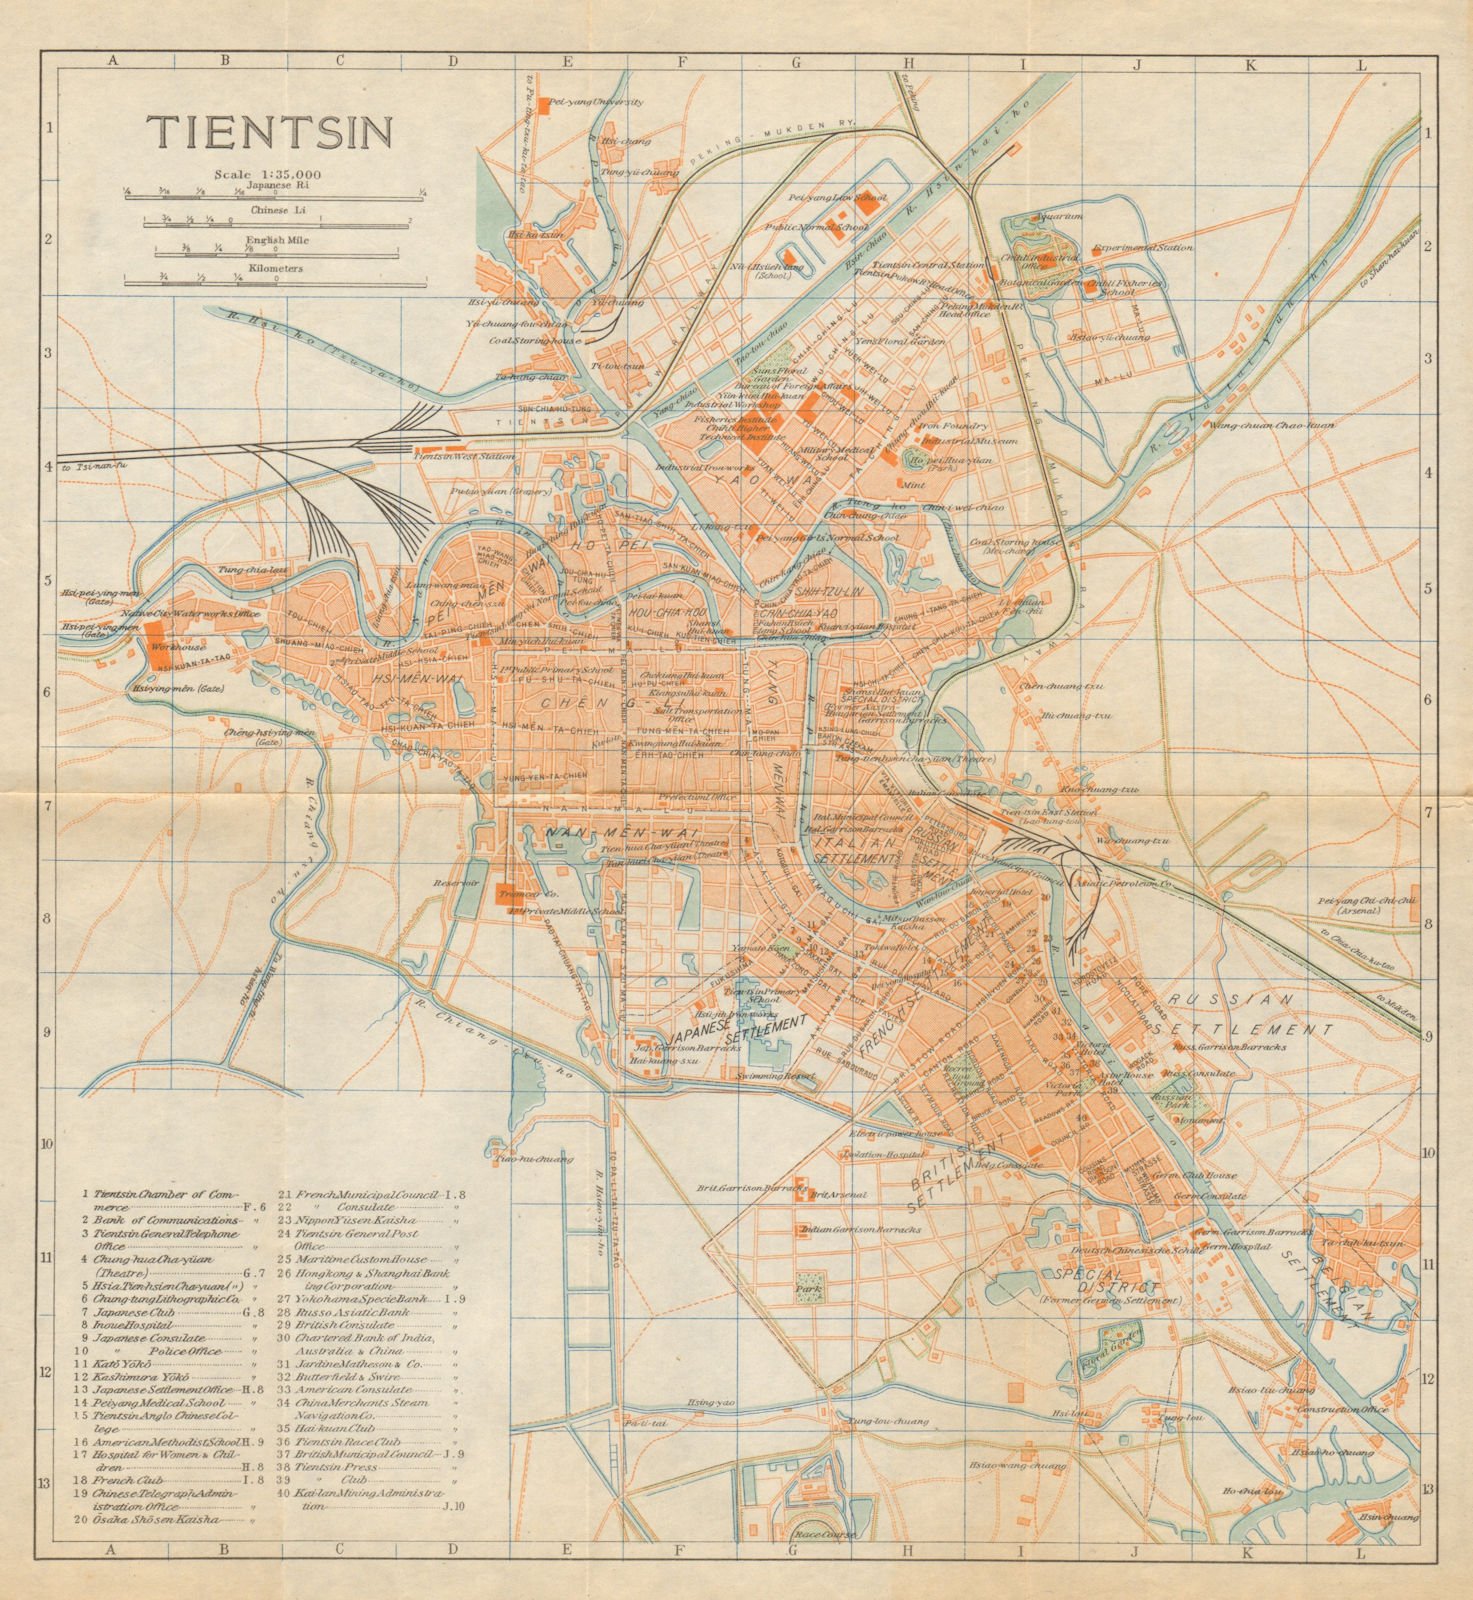 'Tientsin'. Tianjin antique town city plan. China 1924 old map chart